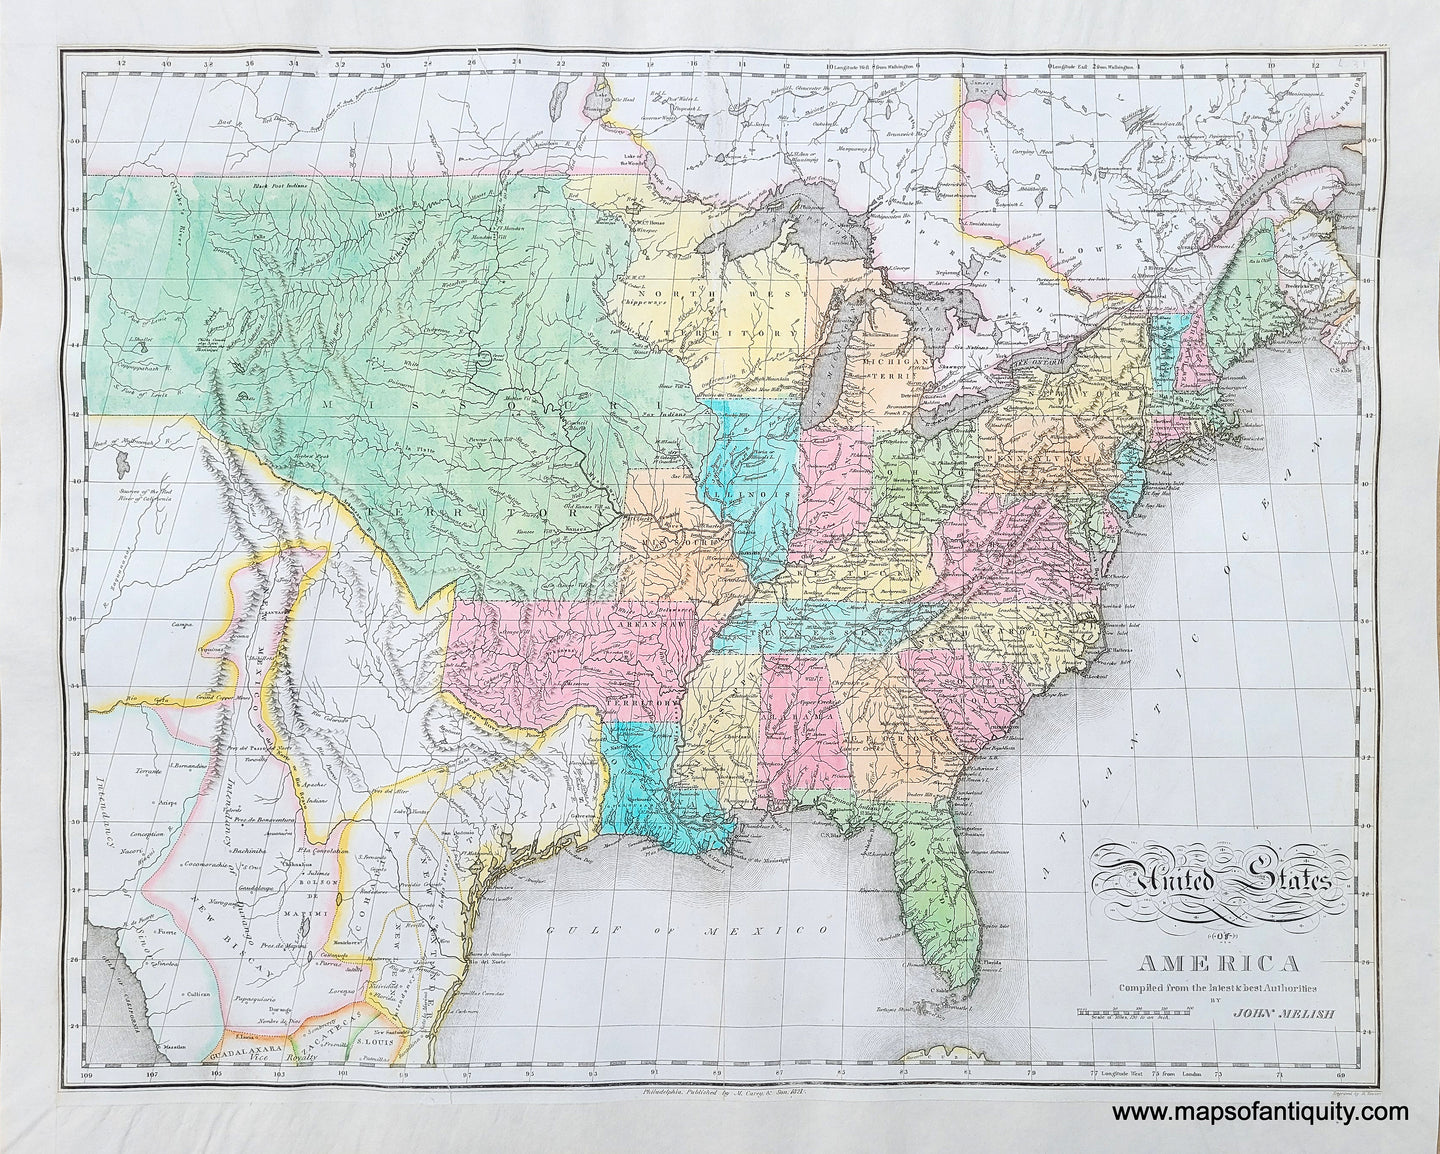 Antique-map-United-States-America-Melish-Lavoisne-1820-Texas-Territories-Northwest-Westward-expansion-1820s-1800s-19th-century-Maps-of-Antiquity